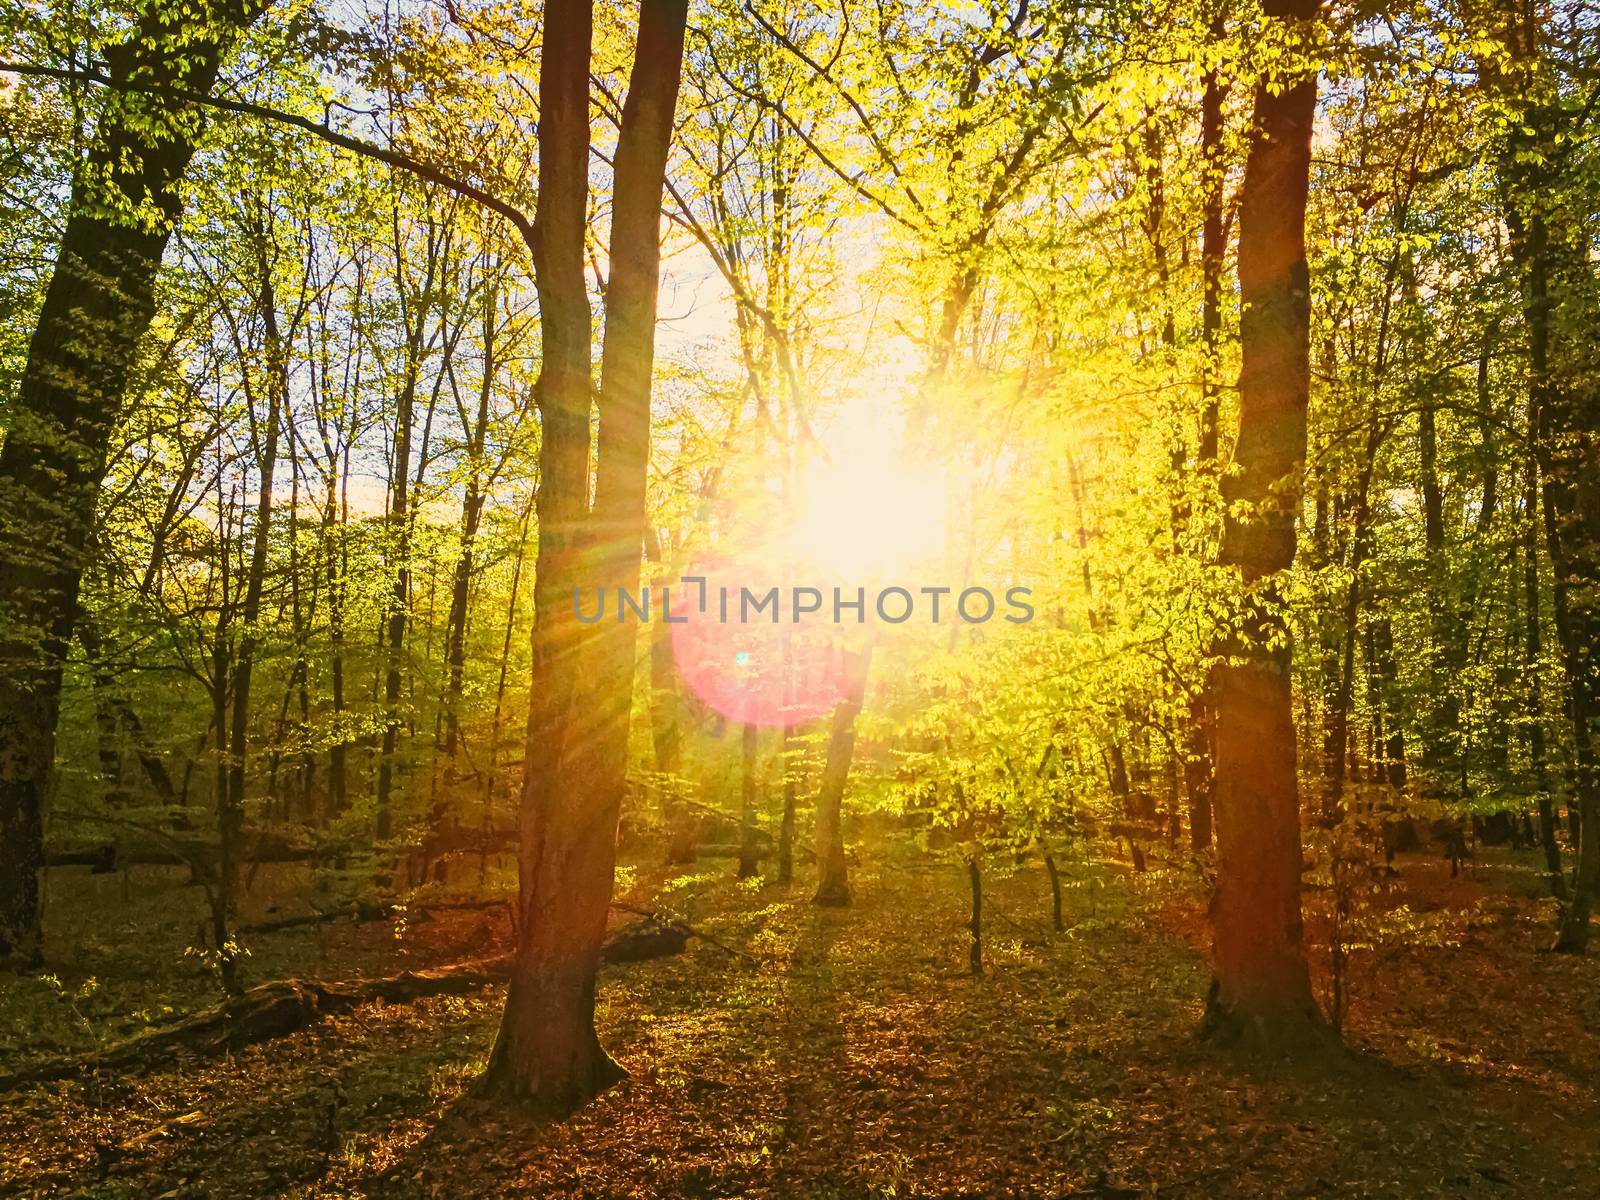 Spring forest landscape at sunset or sunrise, nature and environment